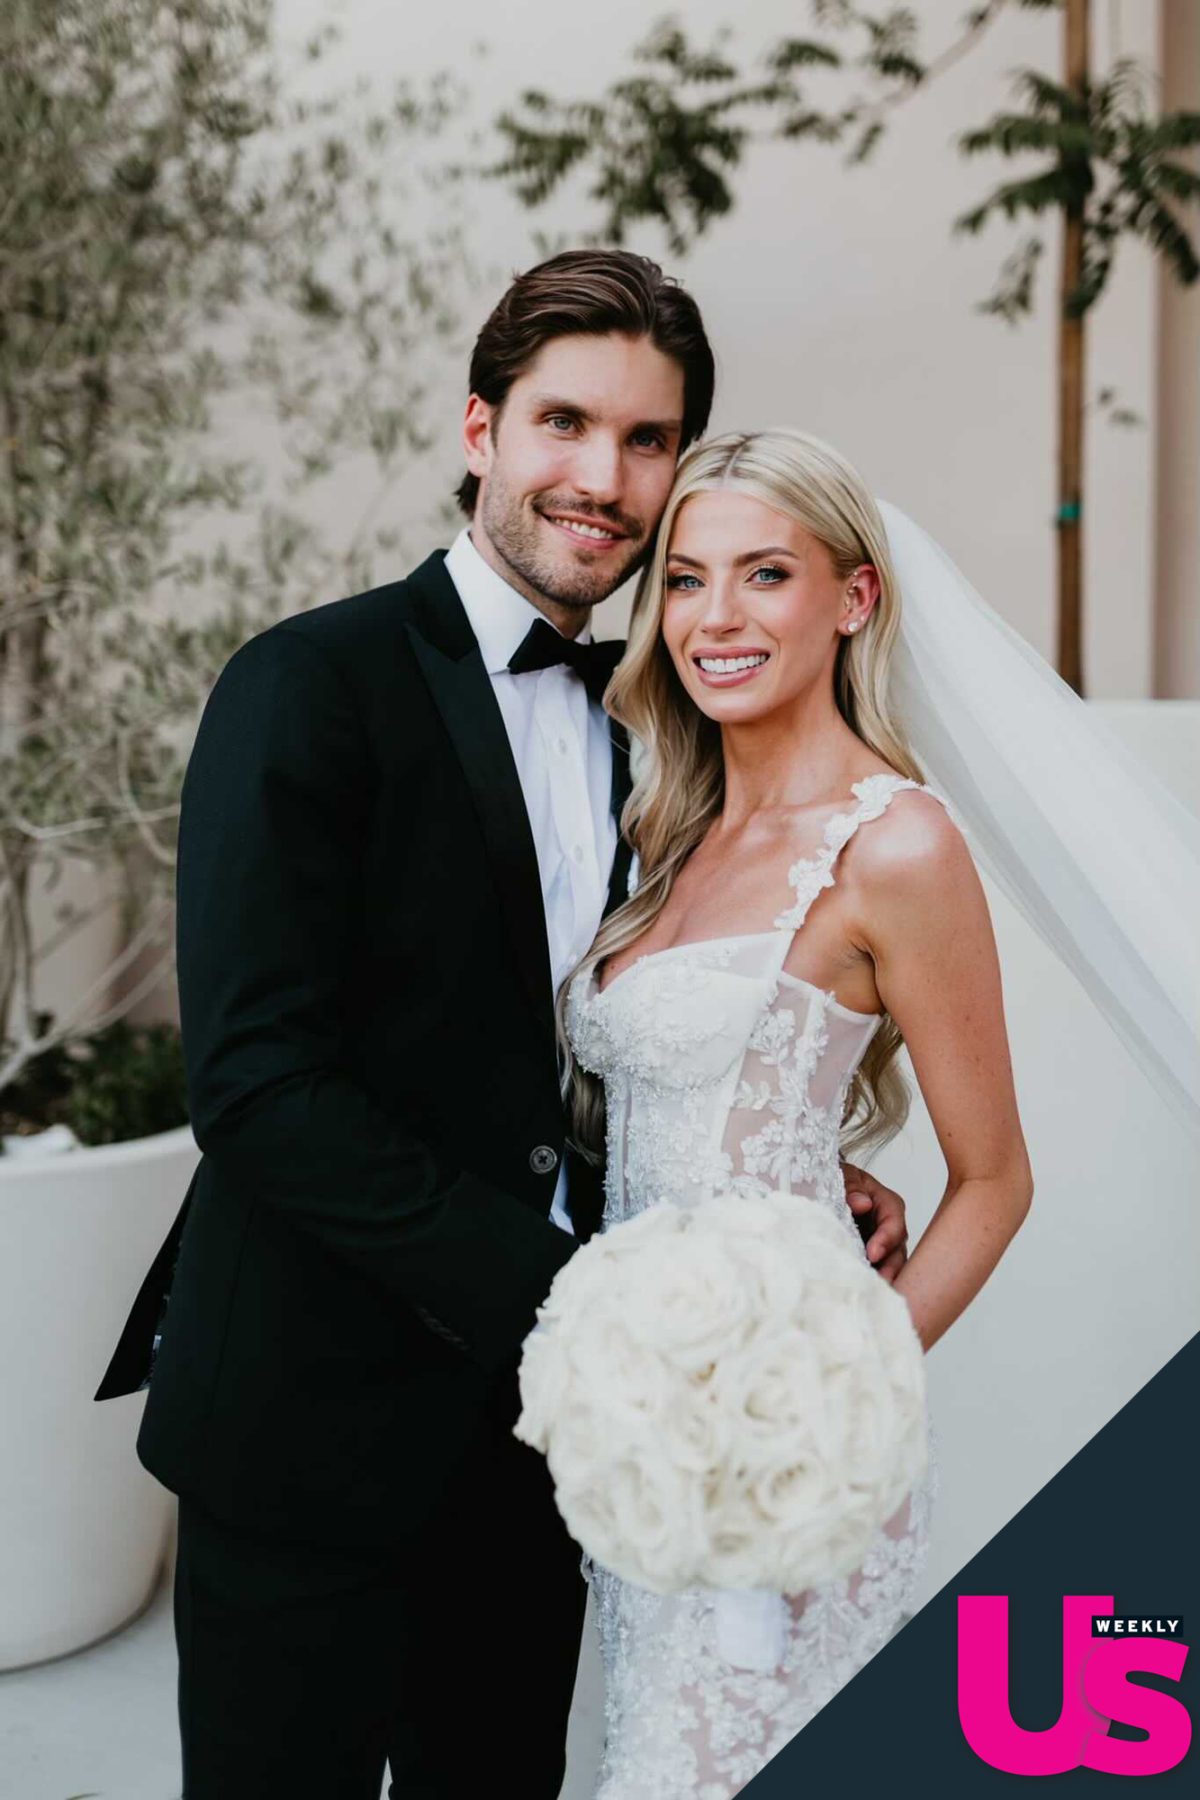 How many NHL players got married the past weekend?